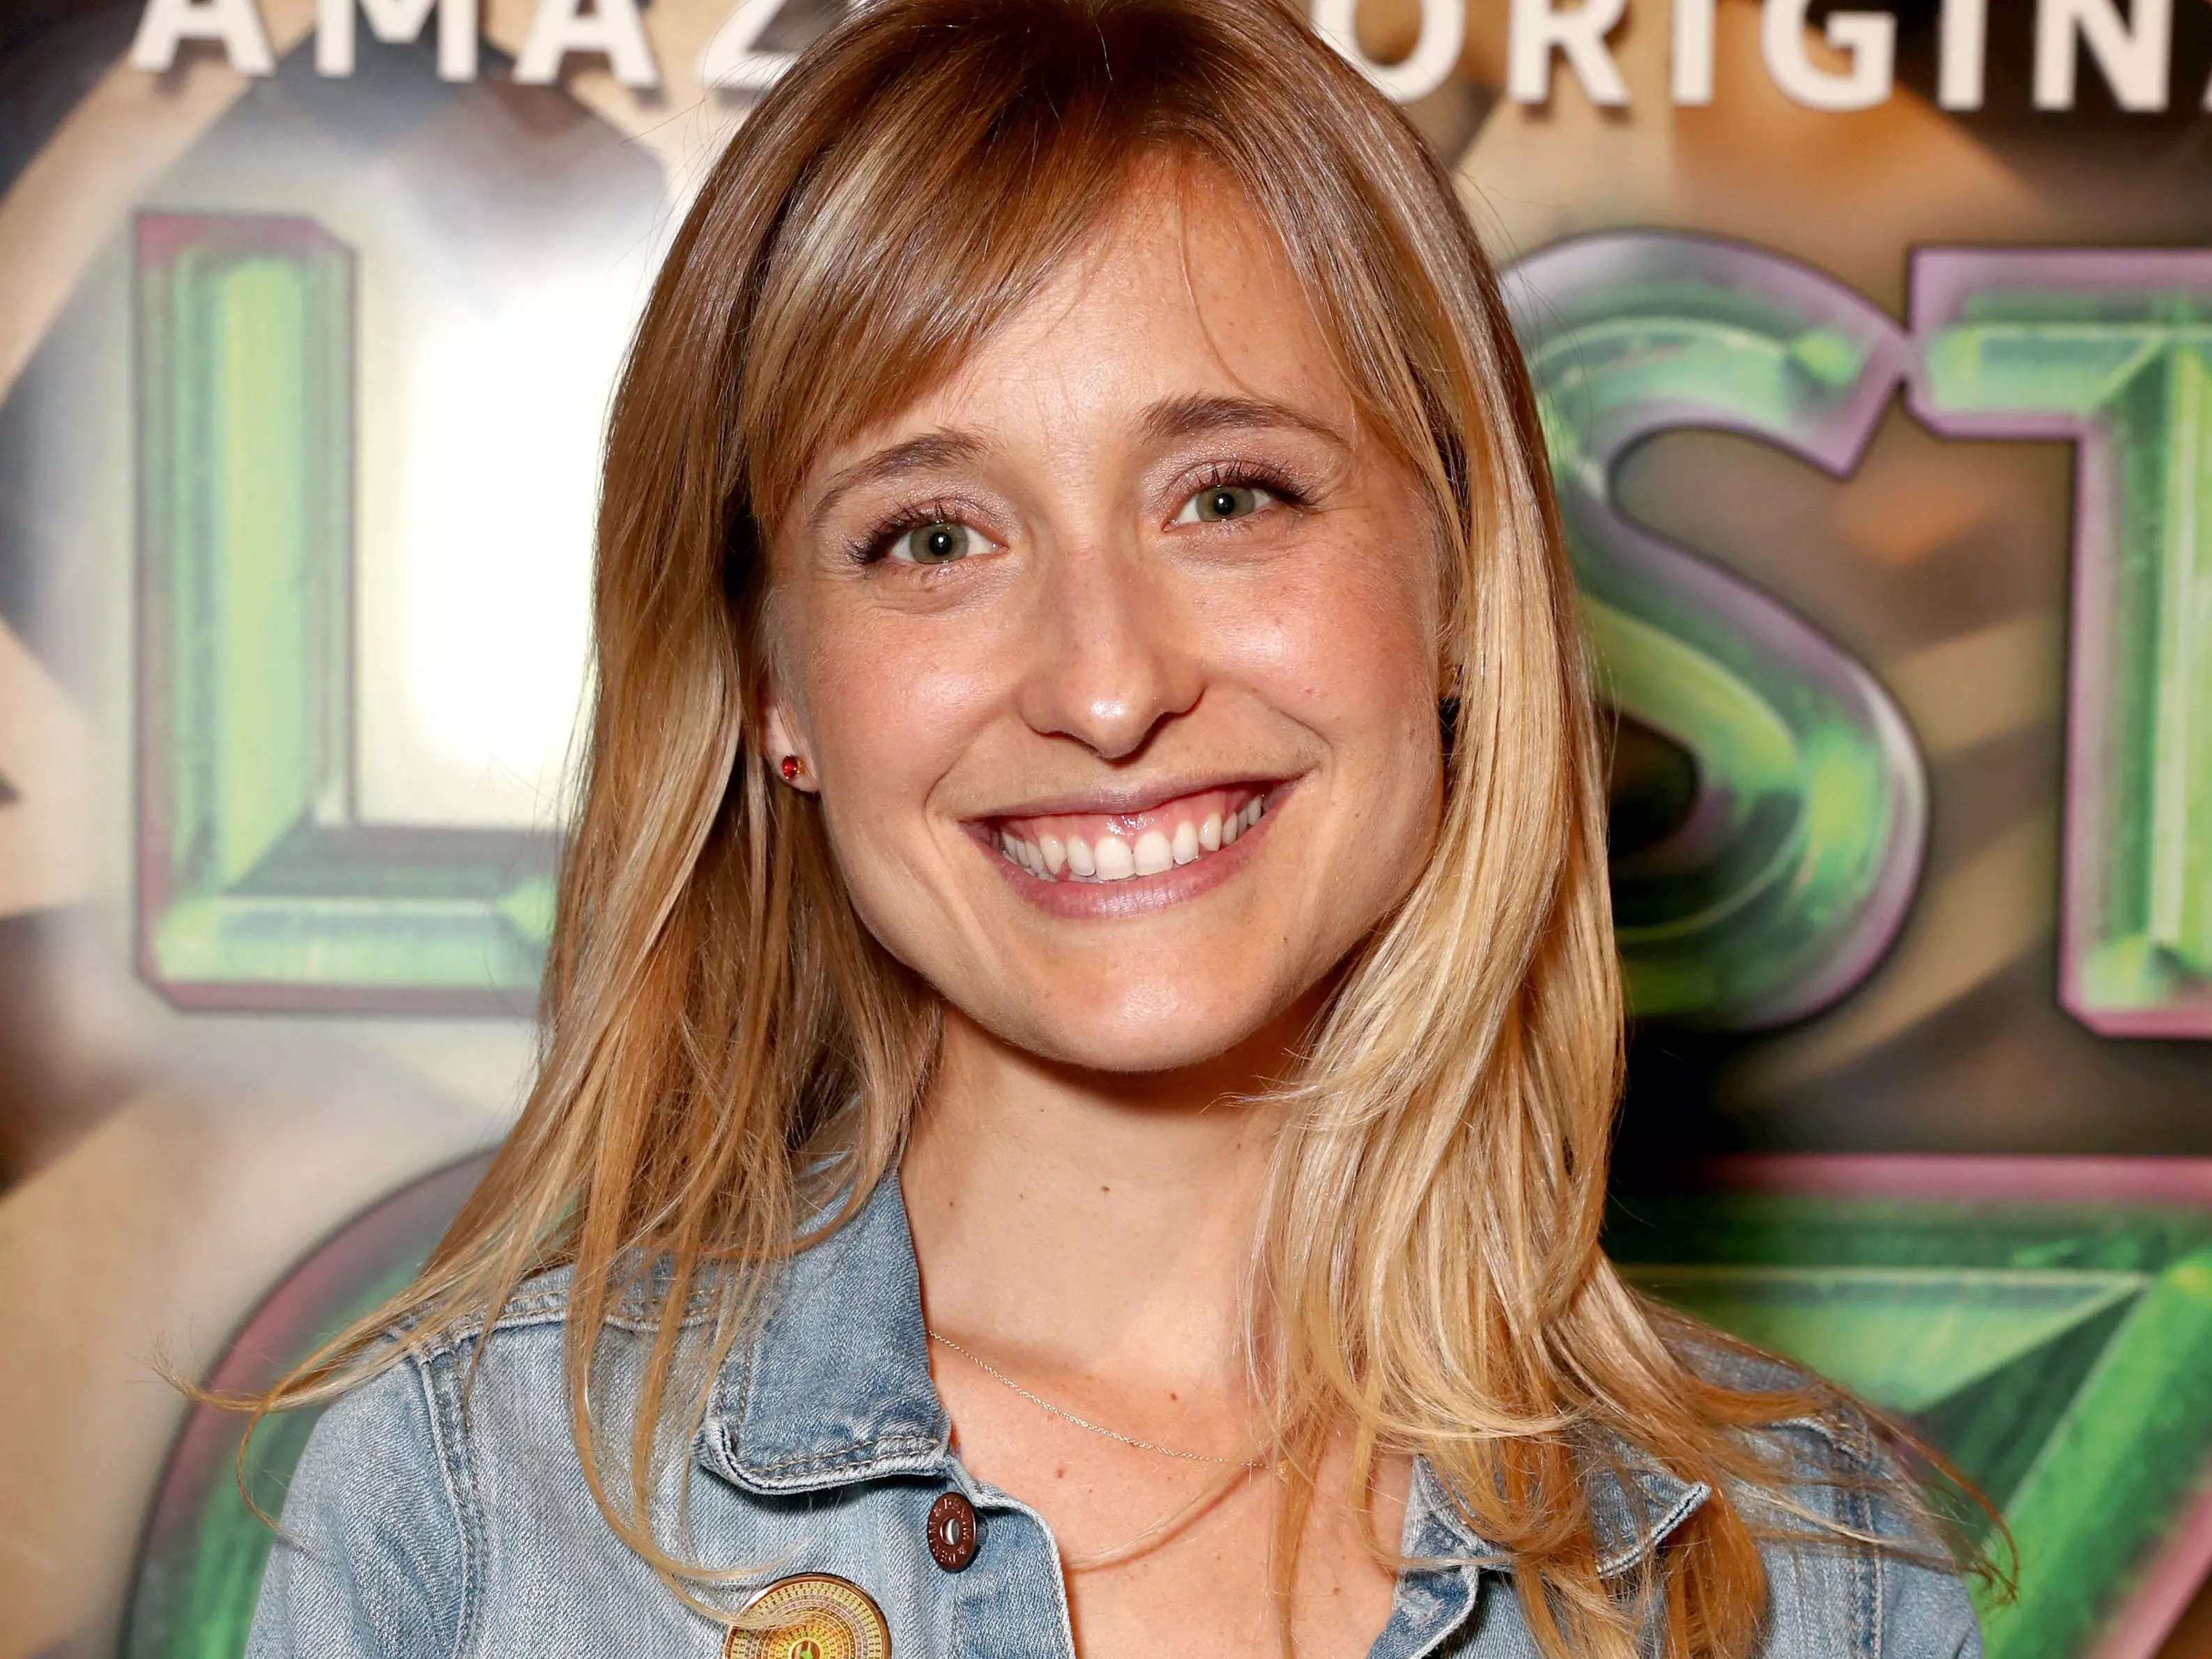 Allison Mack The Former Smallville Actress And Convicted Nxivm Sex